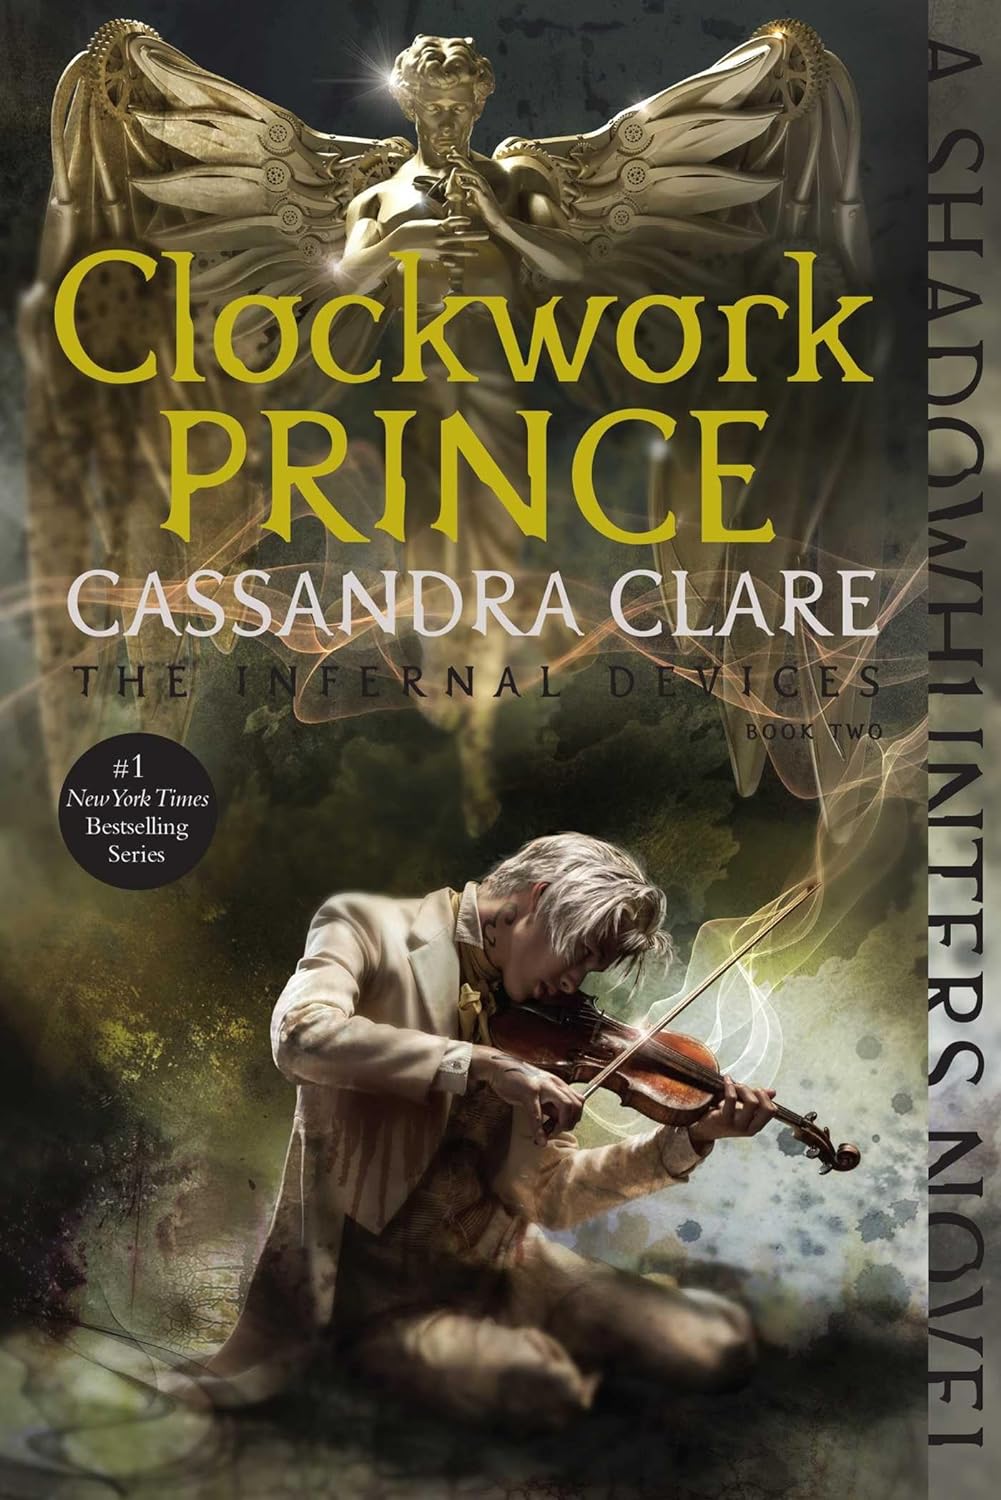 Clockwork Prince by Cassandra Clare Review